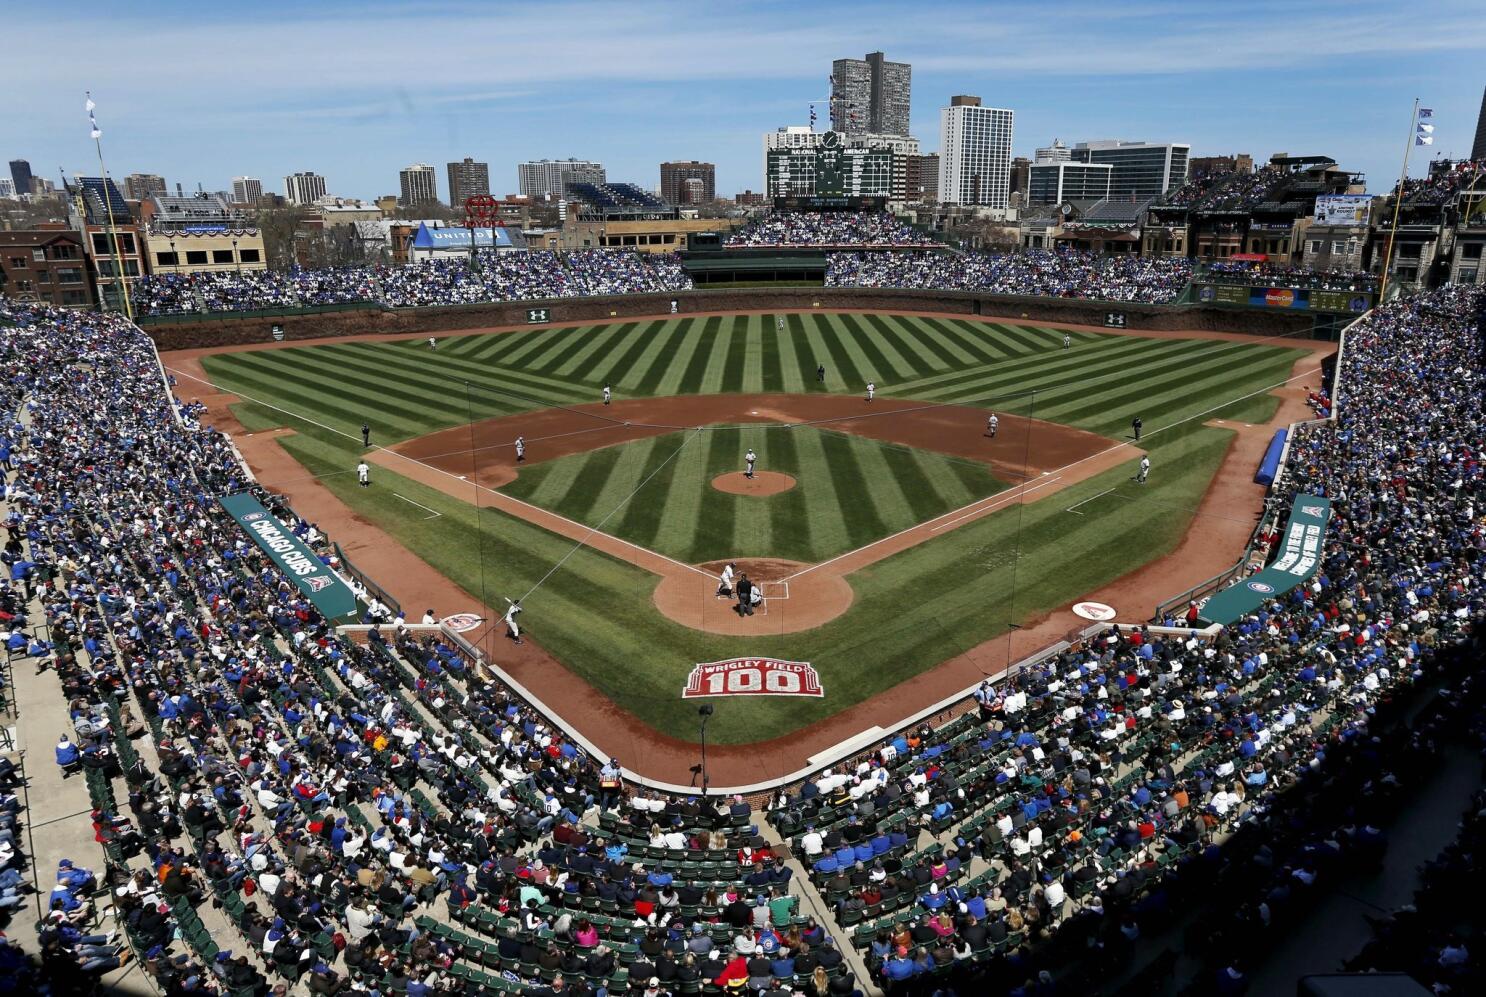 Wrigley Field still 'home' 100 years later